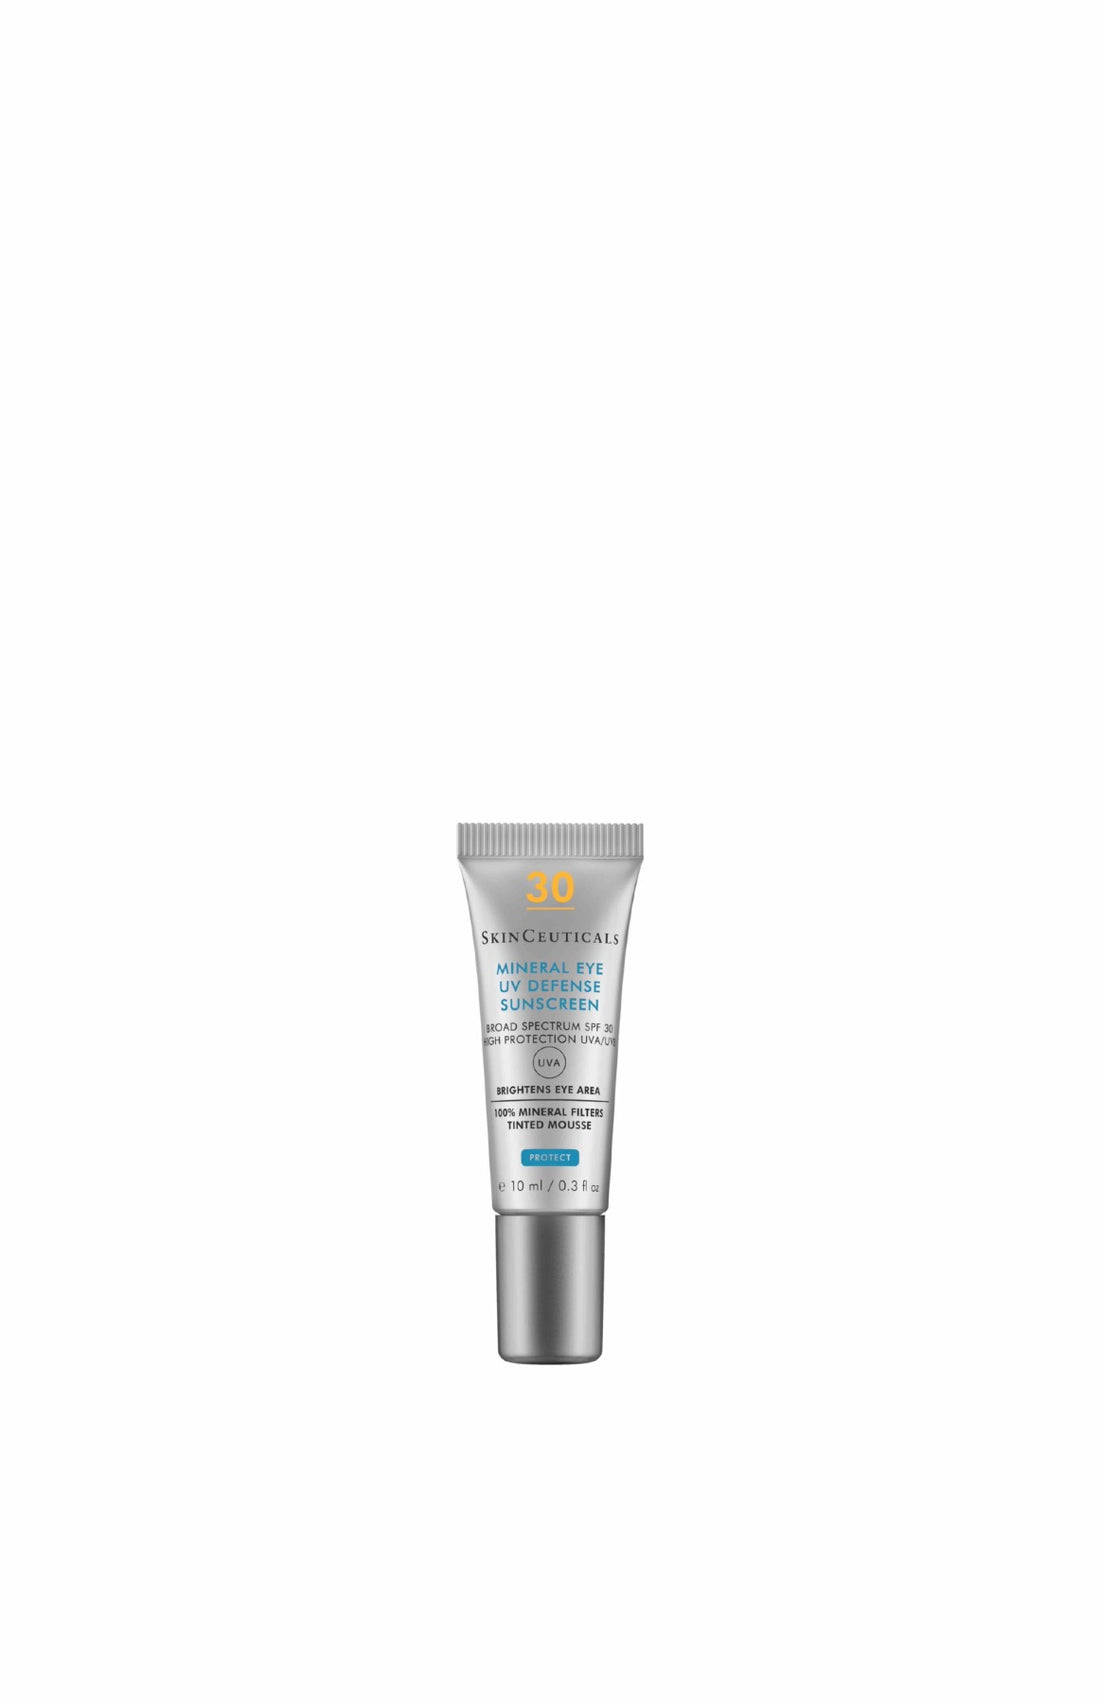 SkinCeuticals Mineral Eye UV Defense SPF 30 Sunscreen Protection 30ml